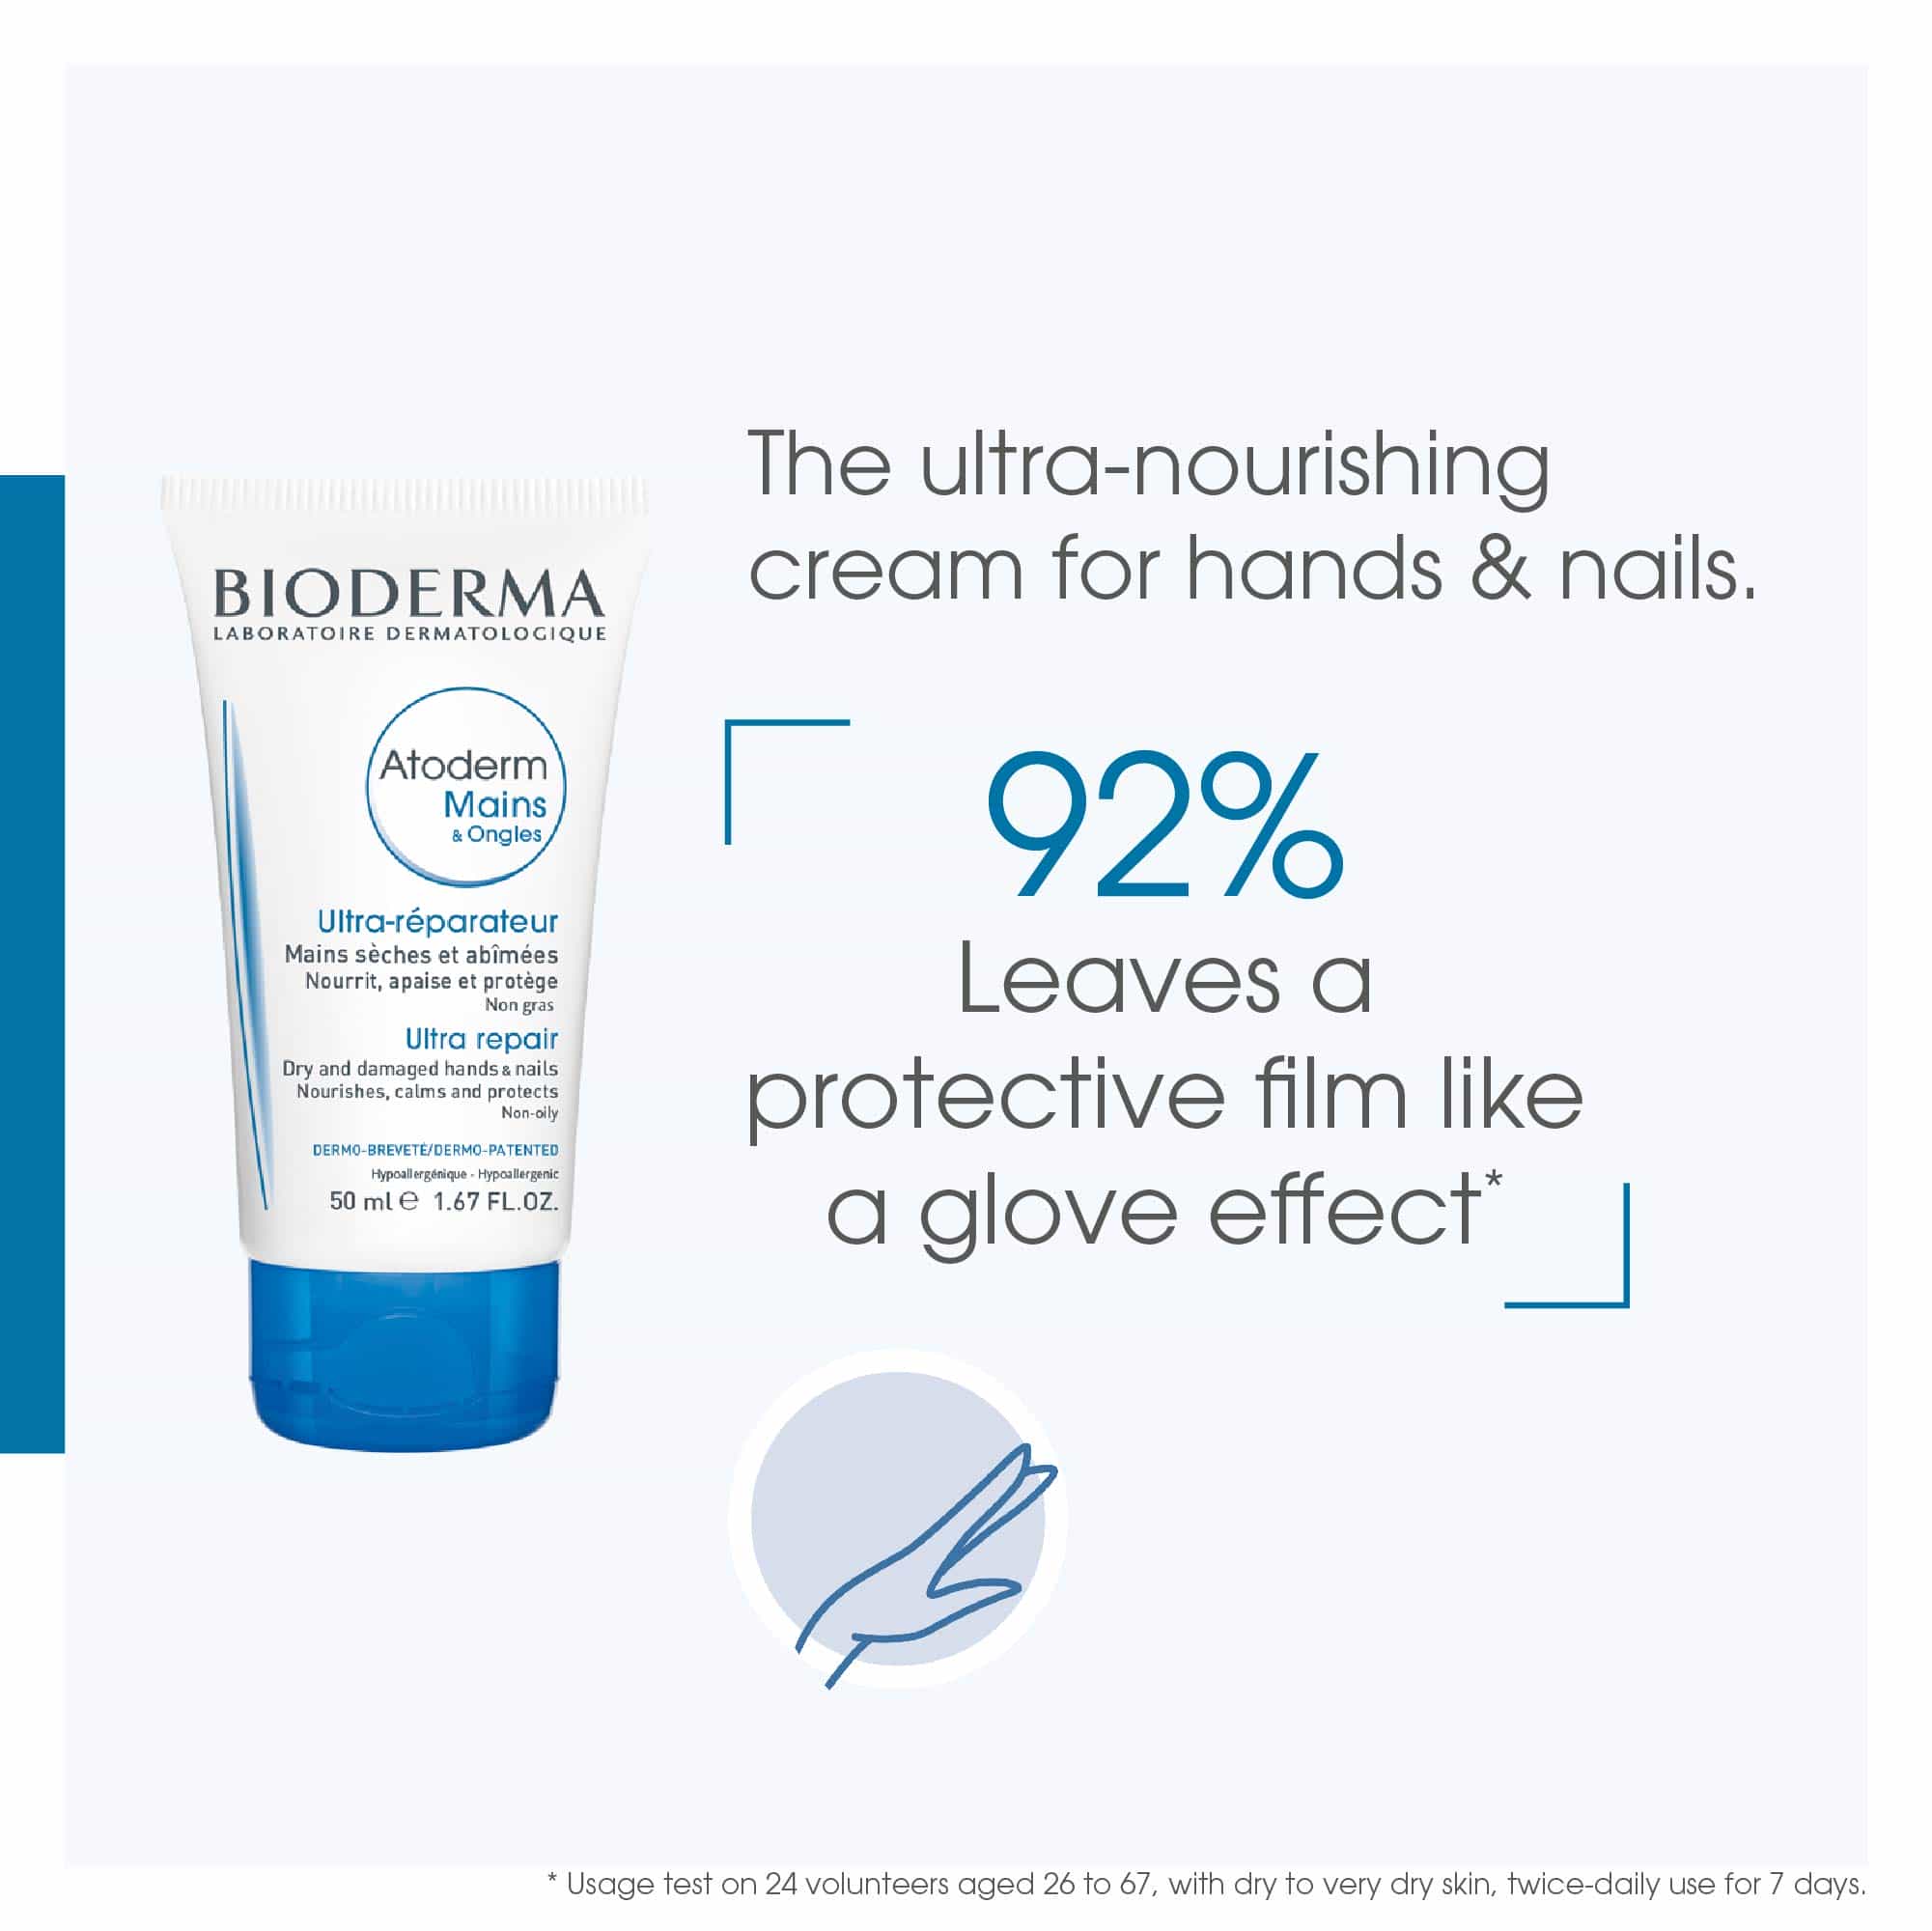 BIODERMA Atoderm Hands and Nails price in Bangladesh